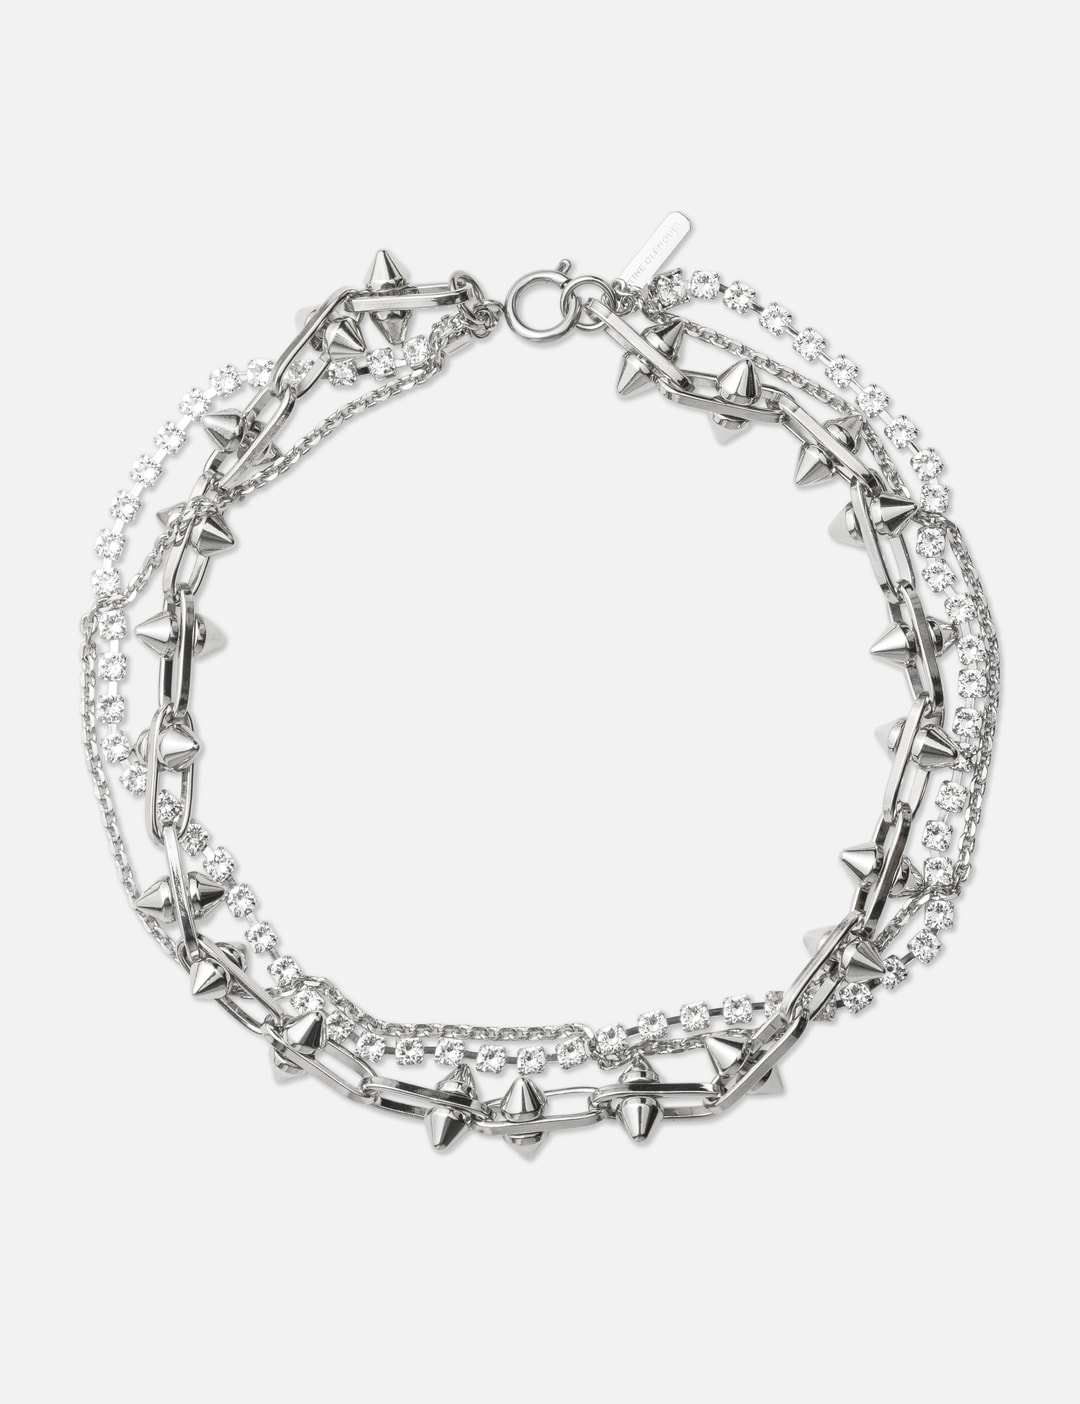 Justine Clenquet - HARMONY CHOKER | HBX - Globally Curated Fashion and ...